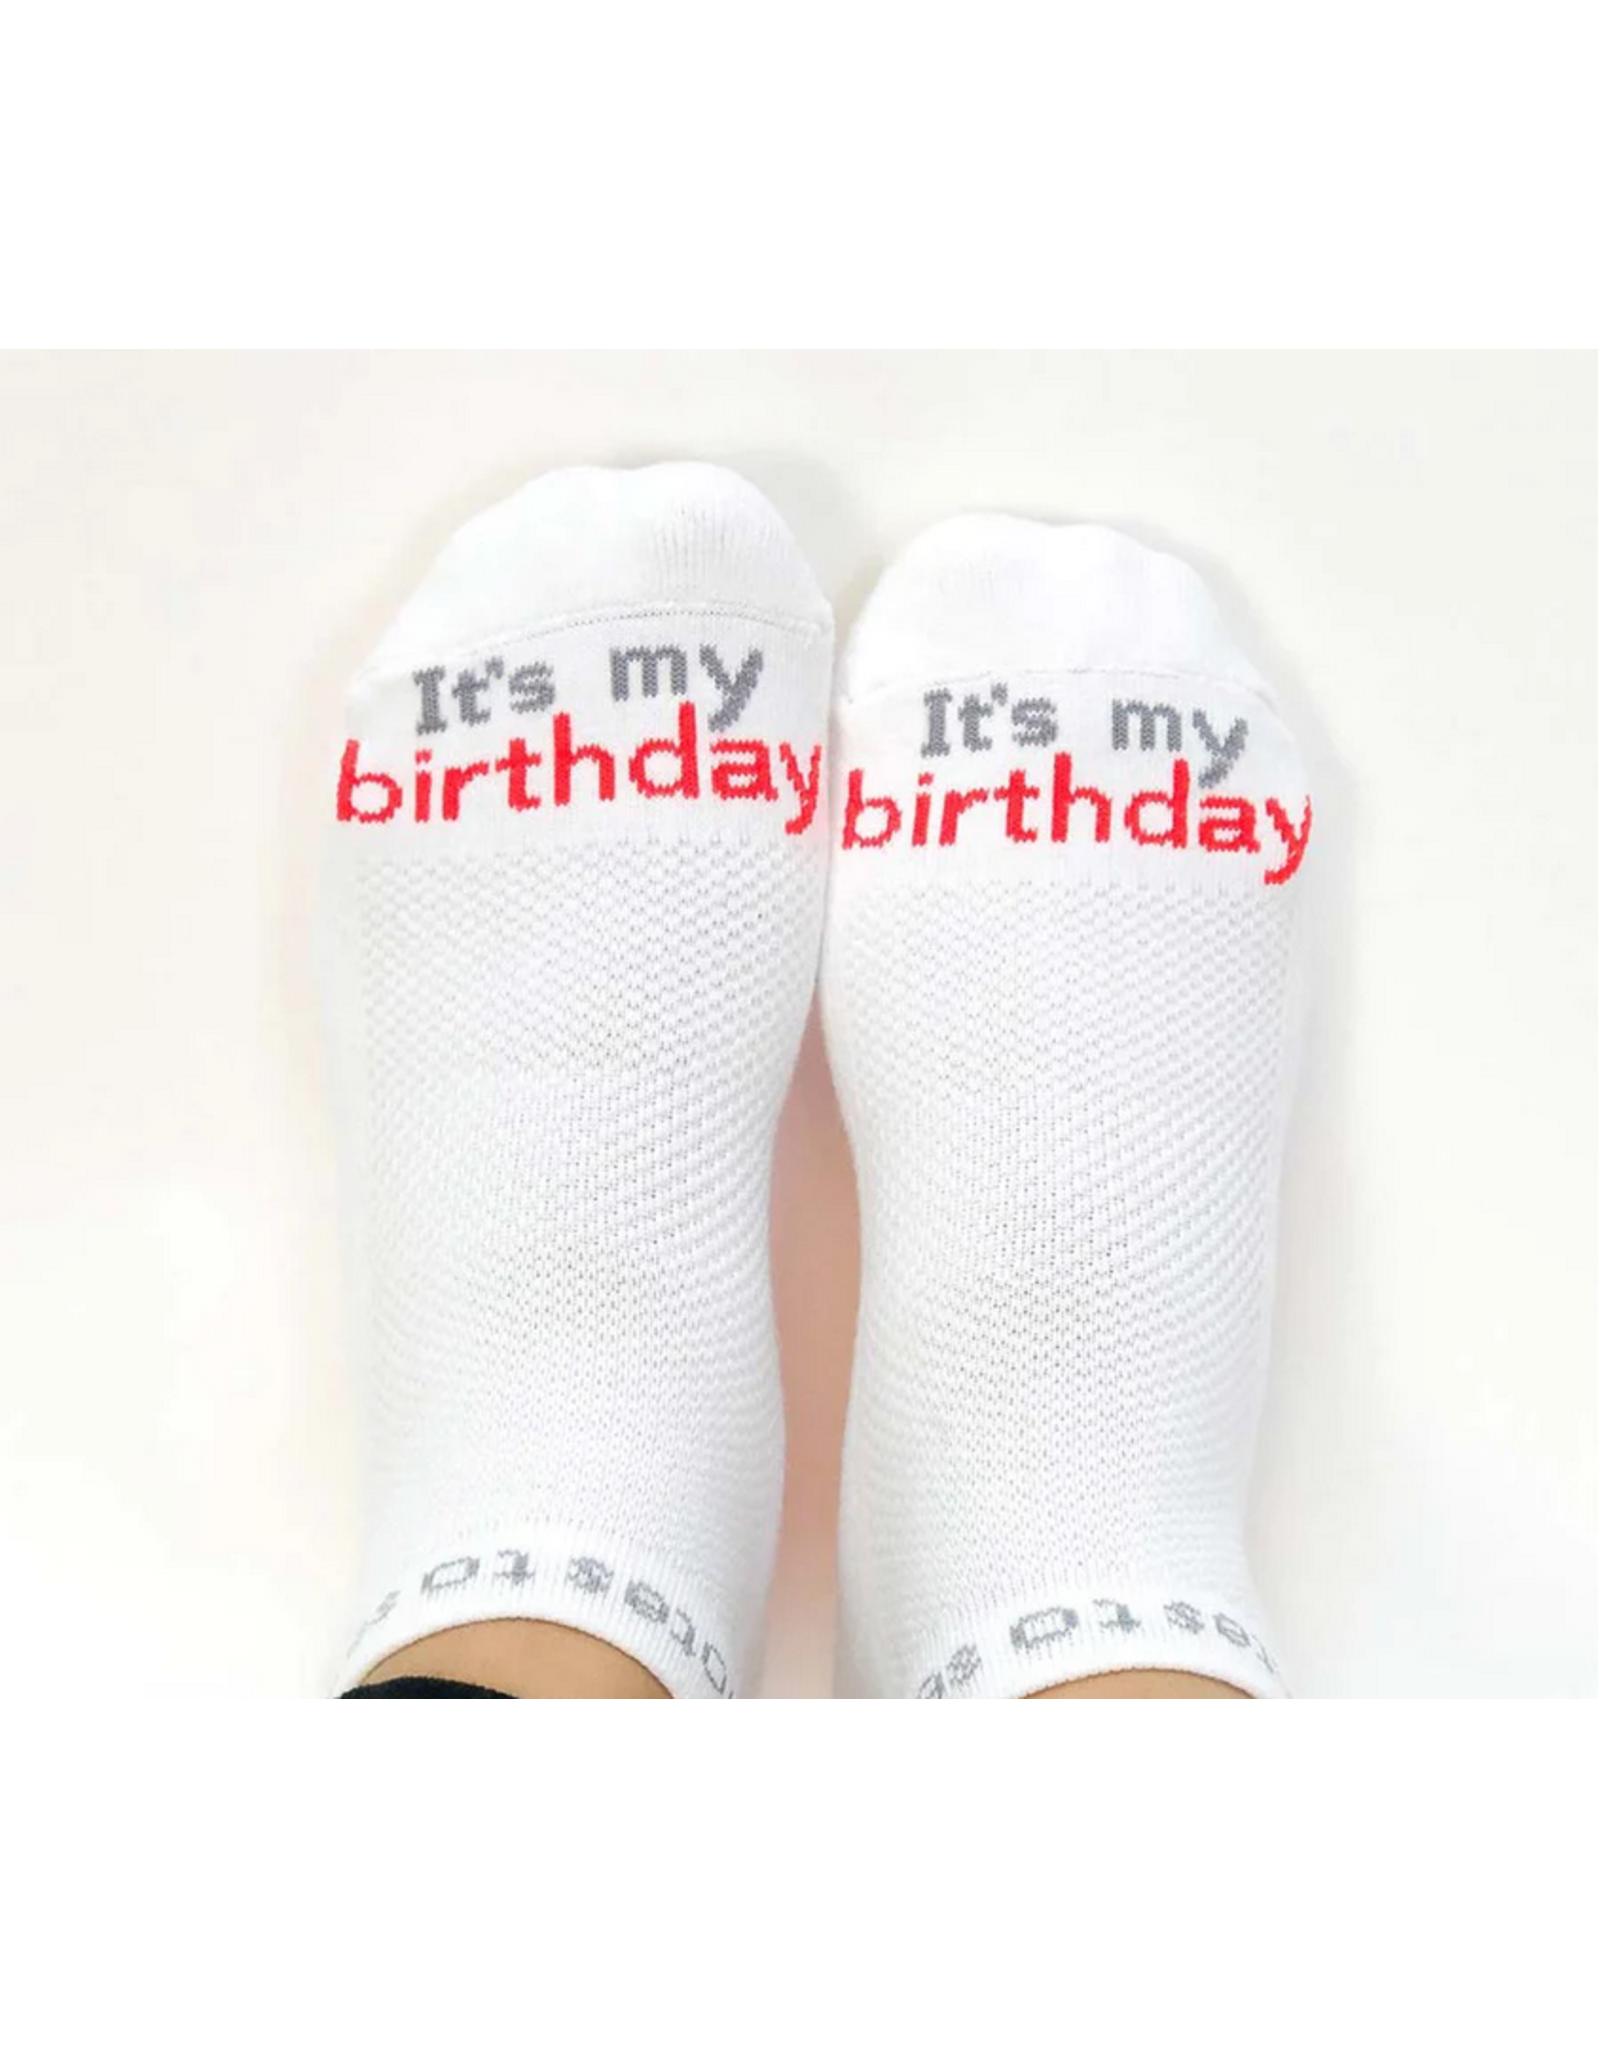 notes to self Notes to Self BIRTHDAY 'It’s My Birthday' Low-Cut Socks